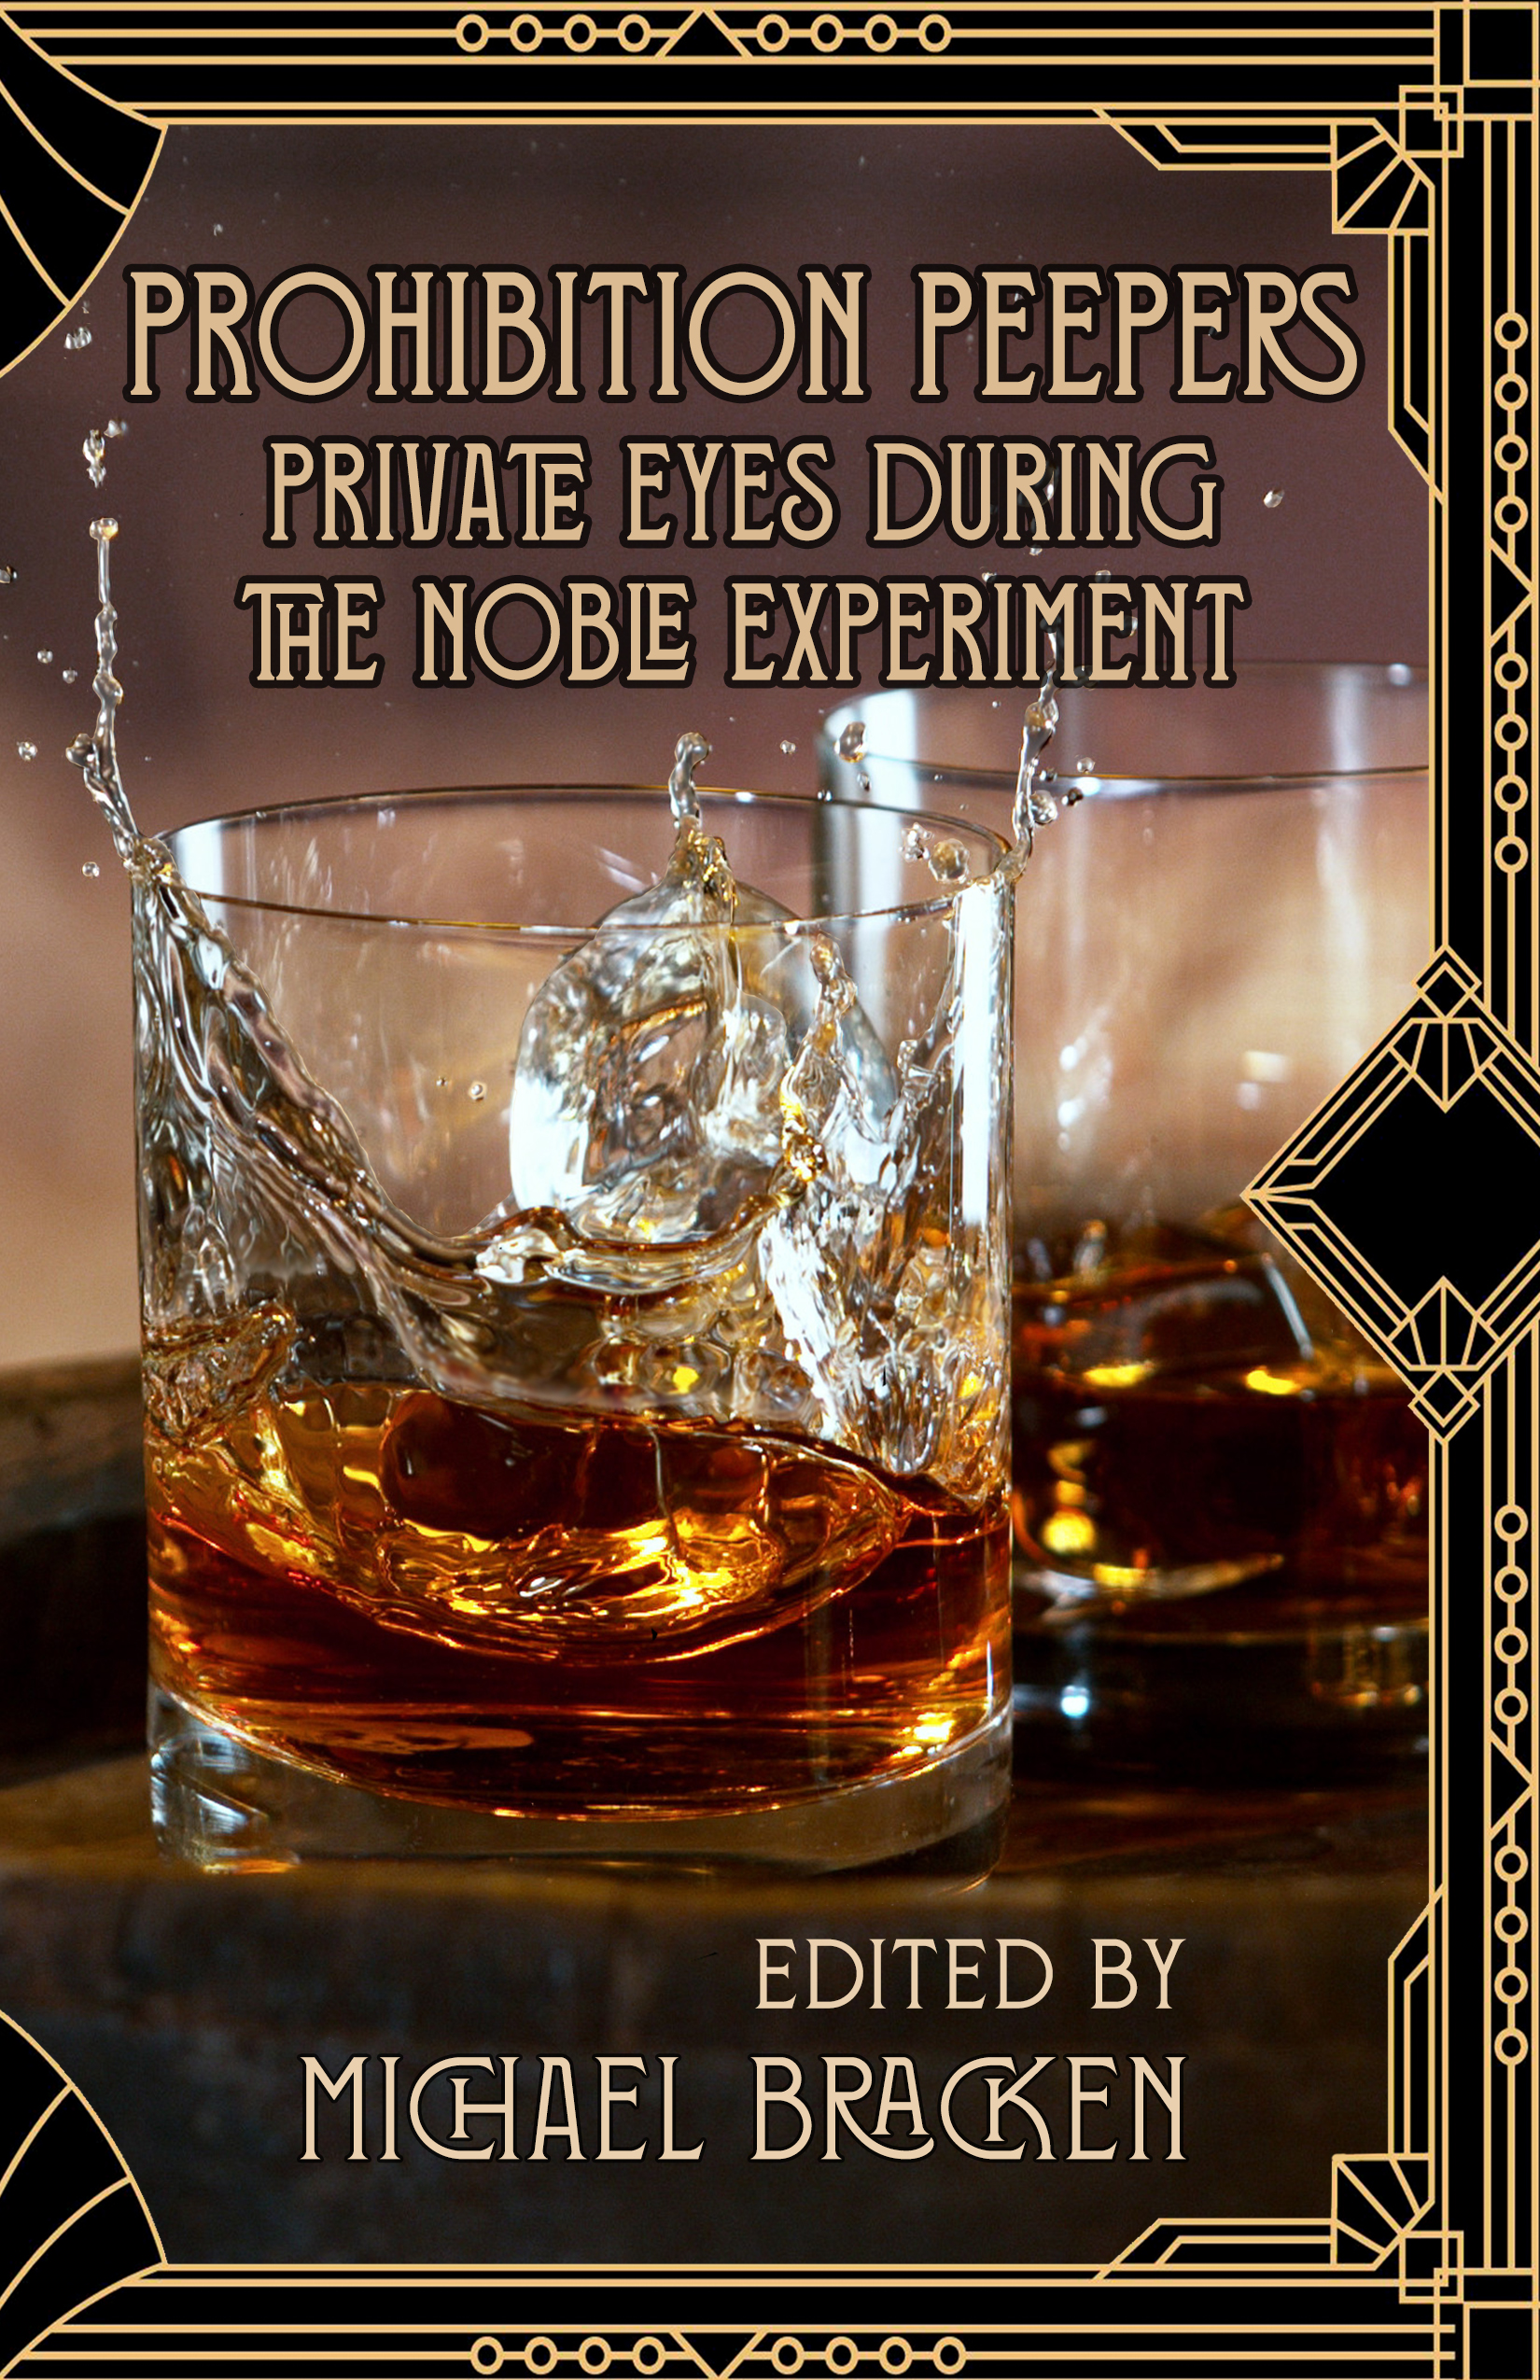 Prohibition Peepers Book Cover